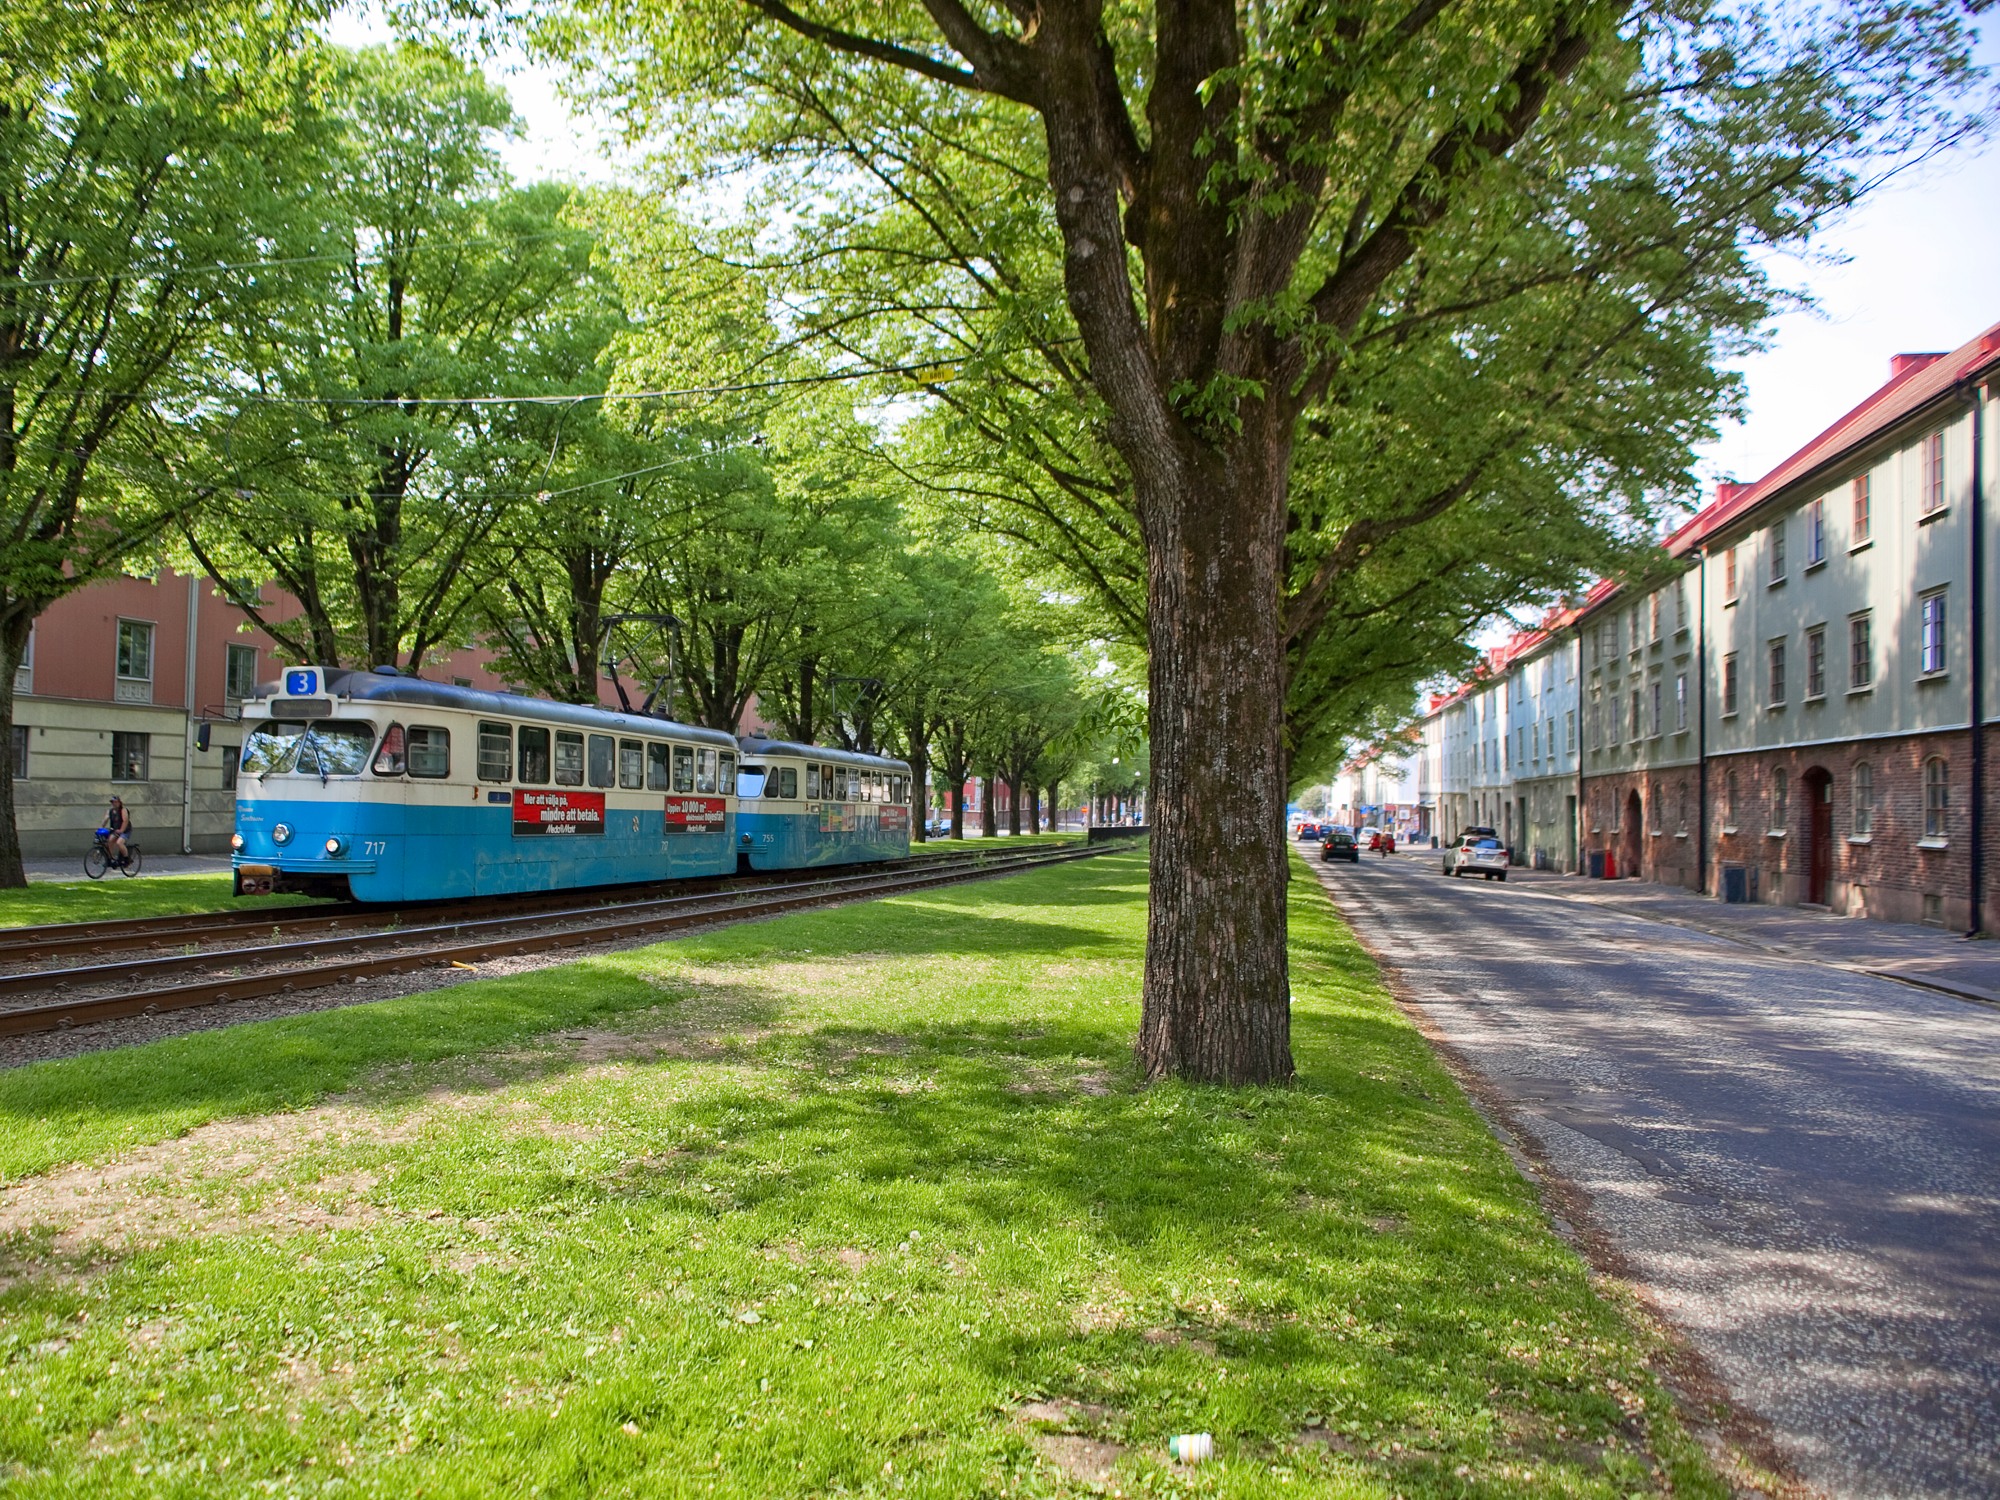 View to the tram tracks where a blue and white tram is passing by, surrounded by trees, grass and buildings. 